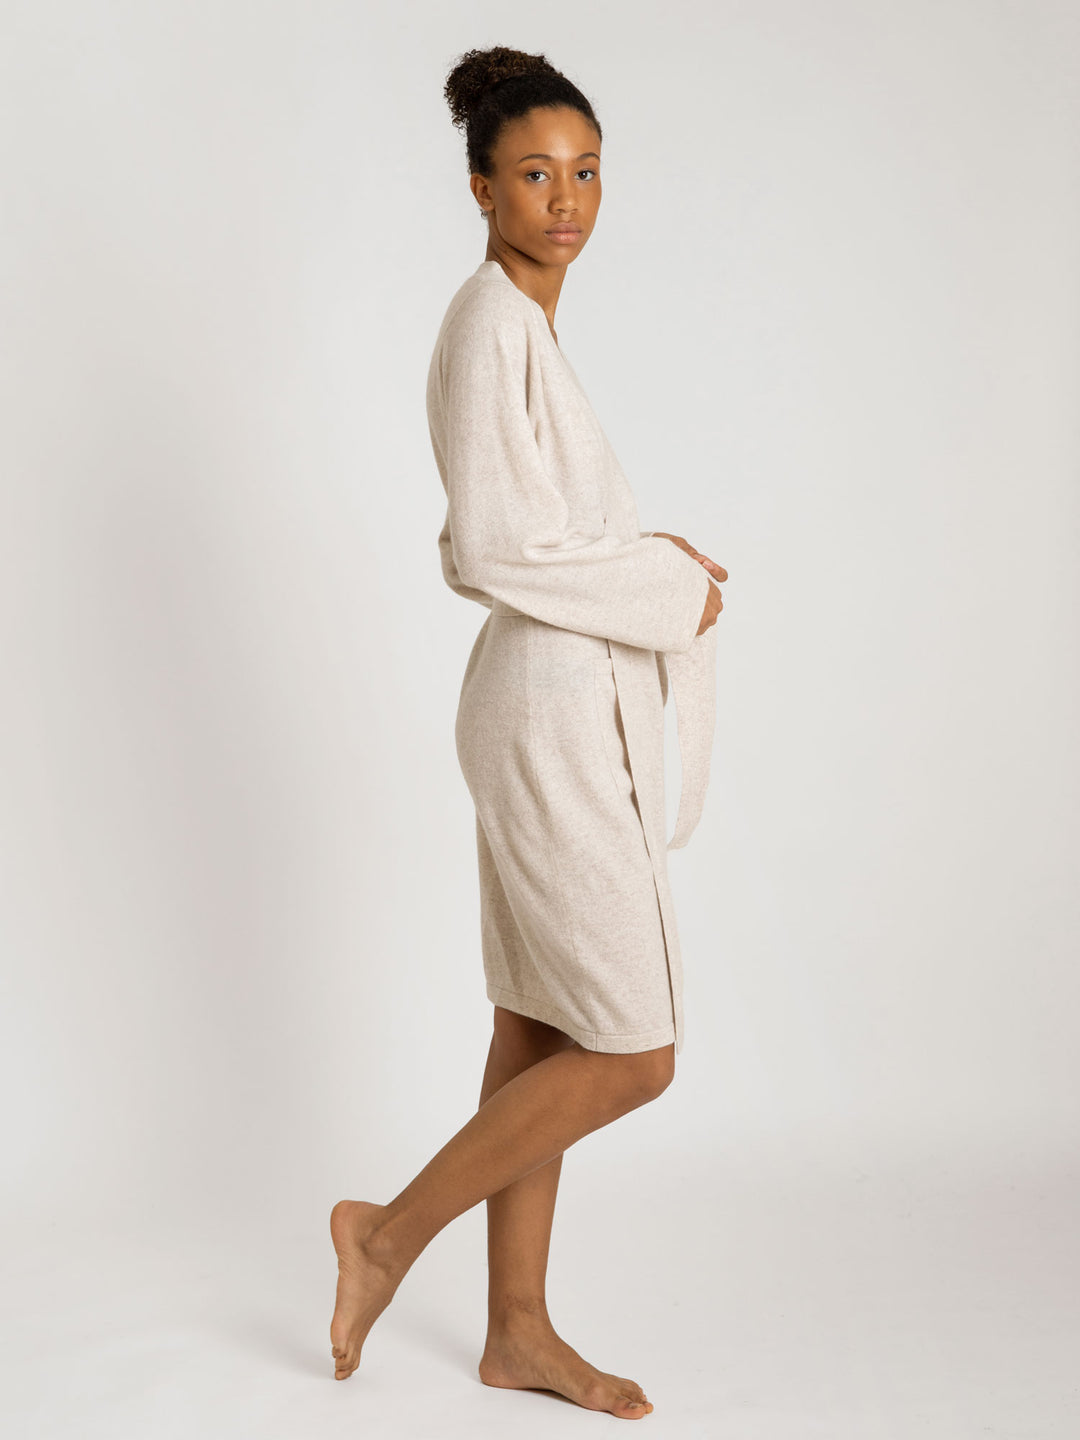 Morning robe Classic in 100% cashmere by Kashmina. Scandinavian design. Color: beige.